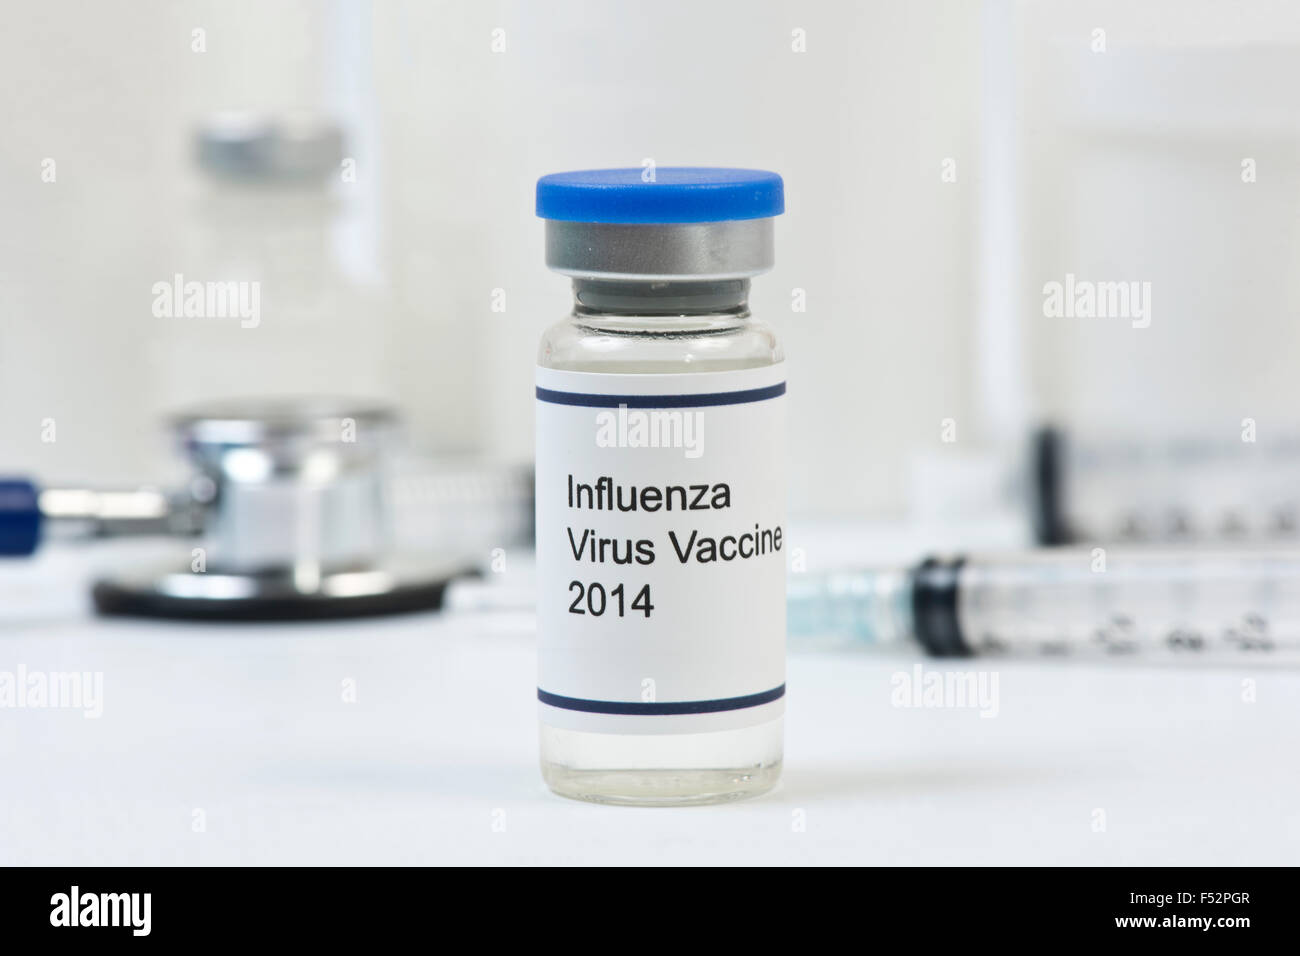 2014 influenza vaccine vial with office supplies in background. Stock Photo